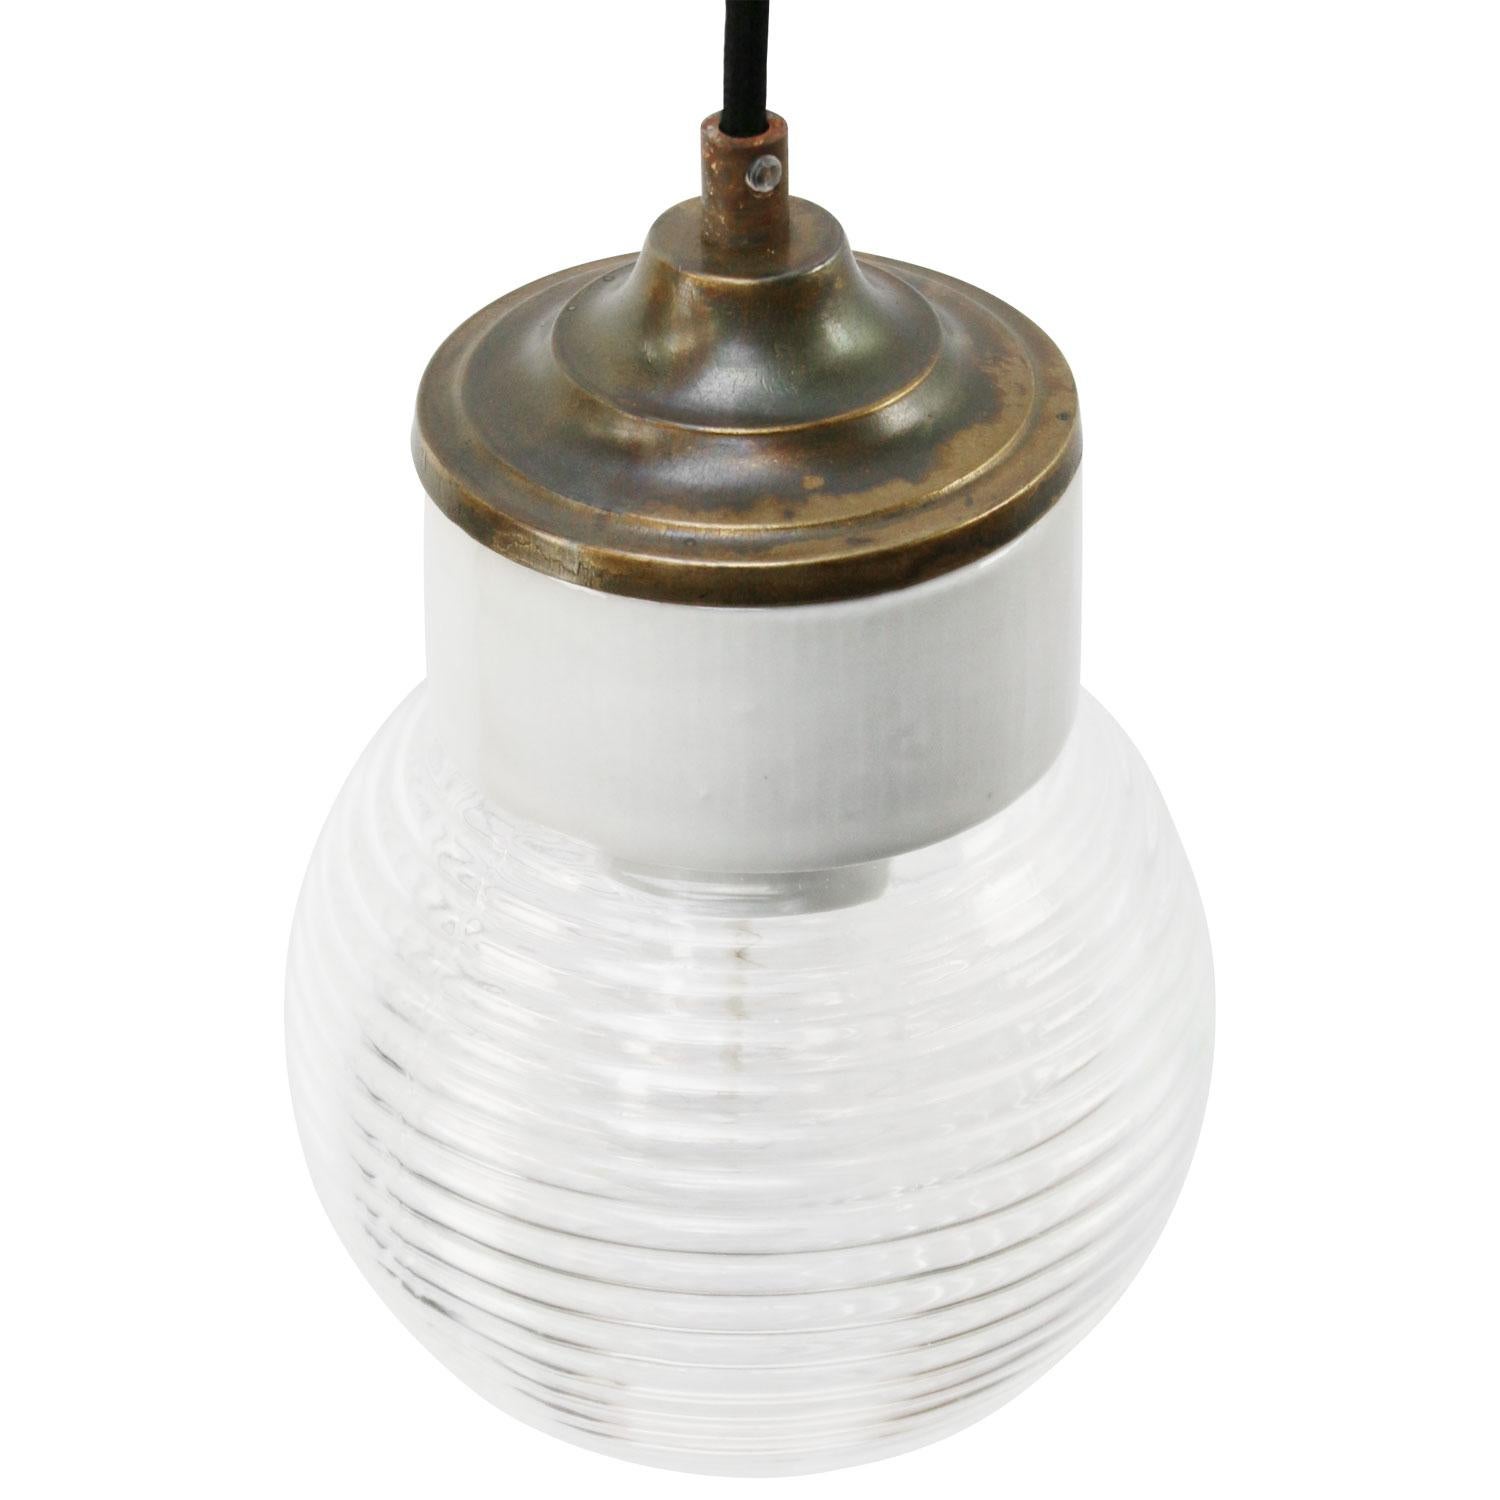 Porcelain Industrial hanging lamp.
White porcelain, brass and clear striped glass.
2 conductors, no ground.

Weight: 1.20 kg / 2.6 lb

Priced per individual item. All lamps have been made suitable by international standards for incandescent